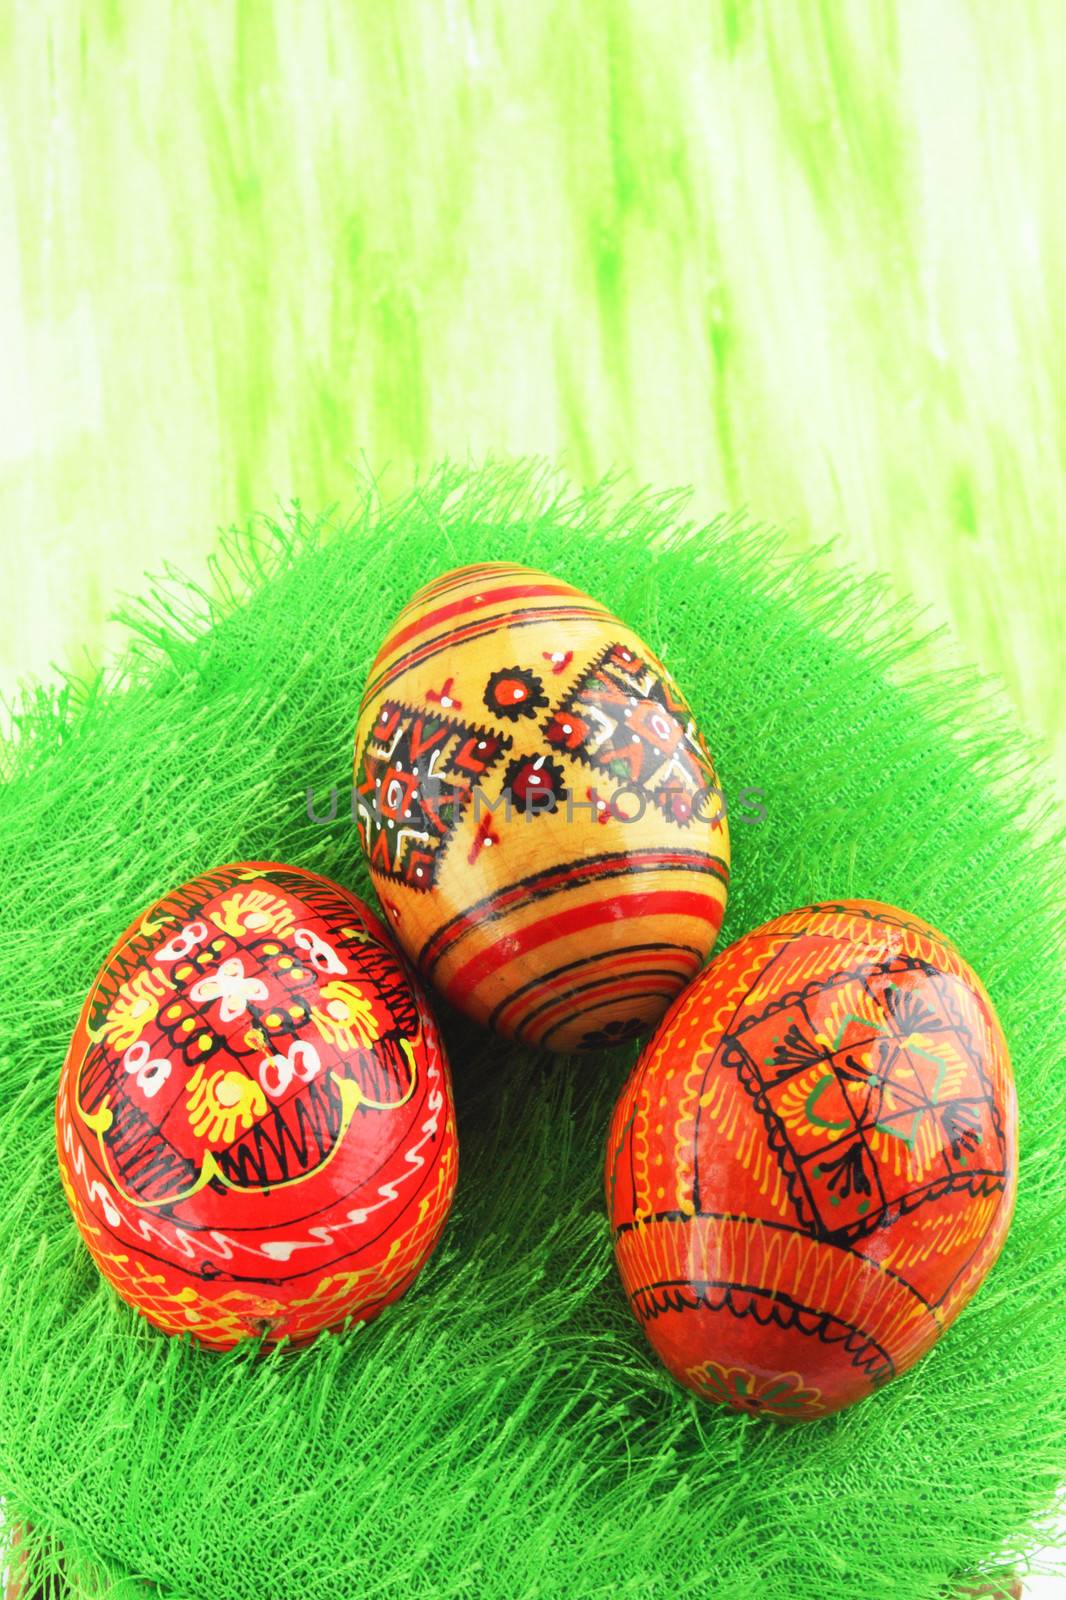 Three eggs with the manual painting against the green background